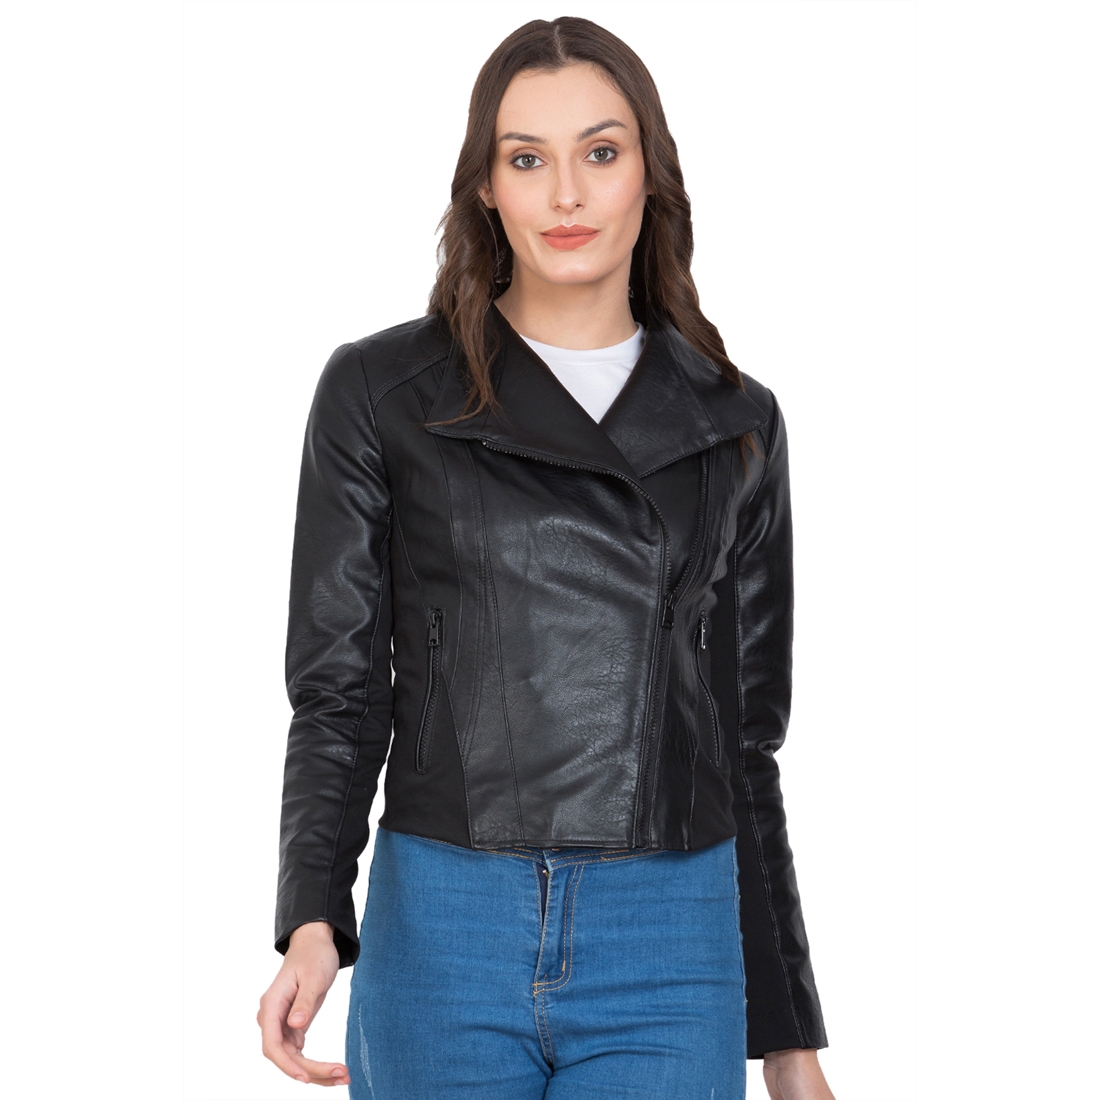 Justanned | JUSTANNED CARBON WOMEN LEATHER JACKET